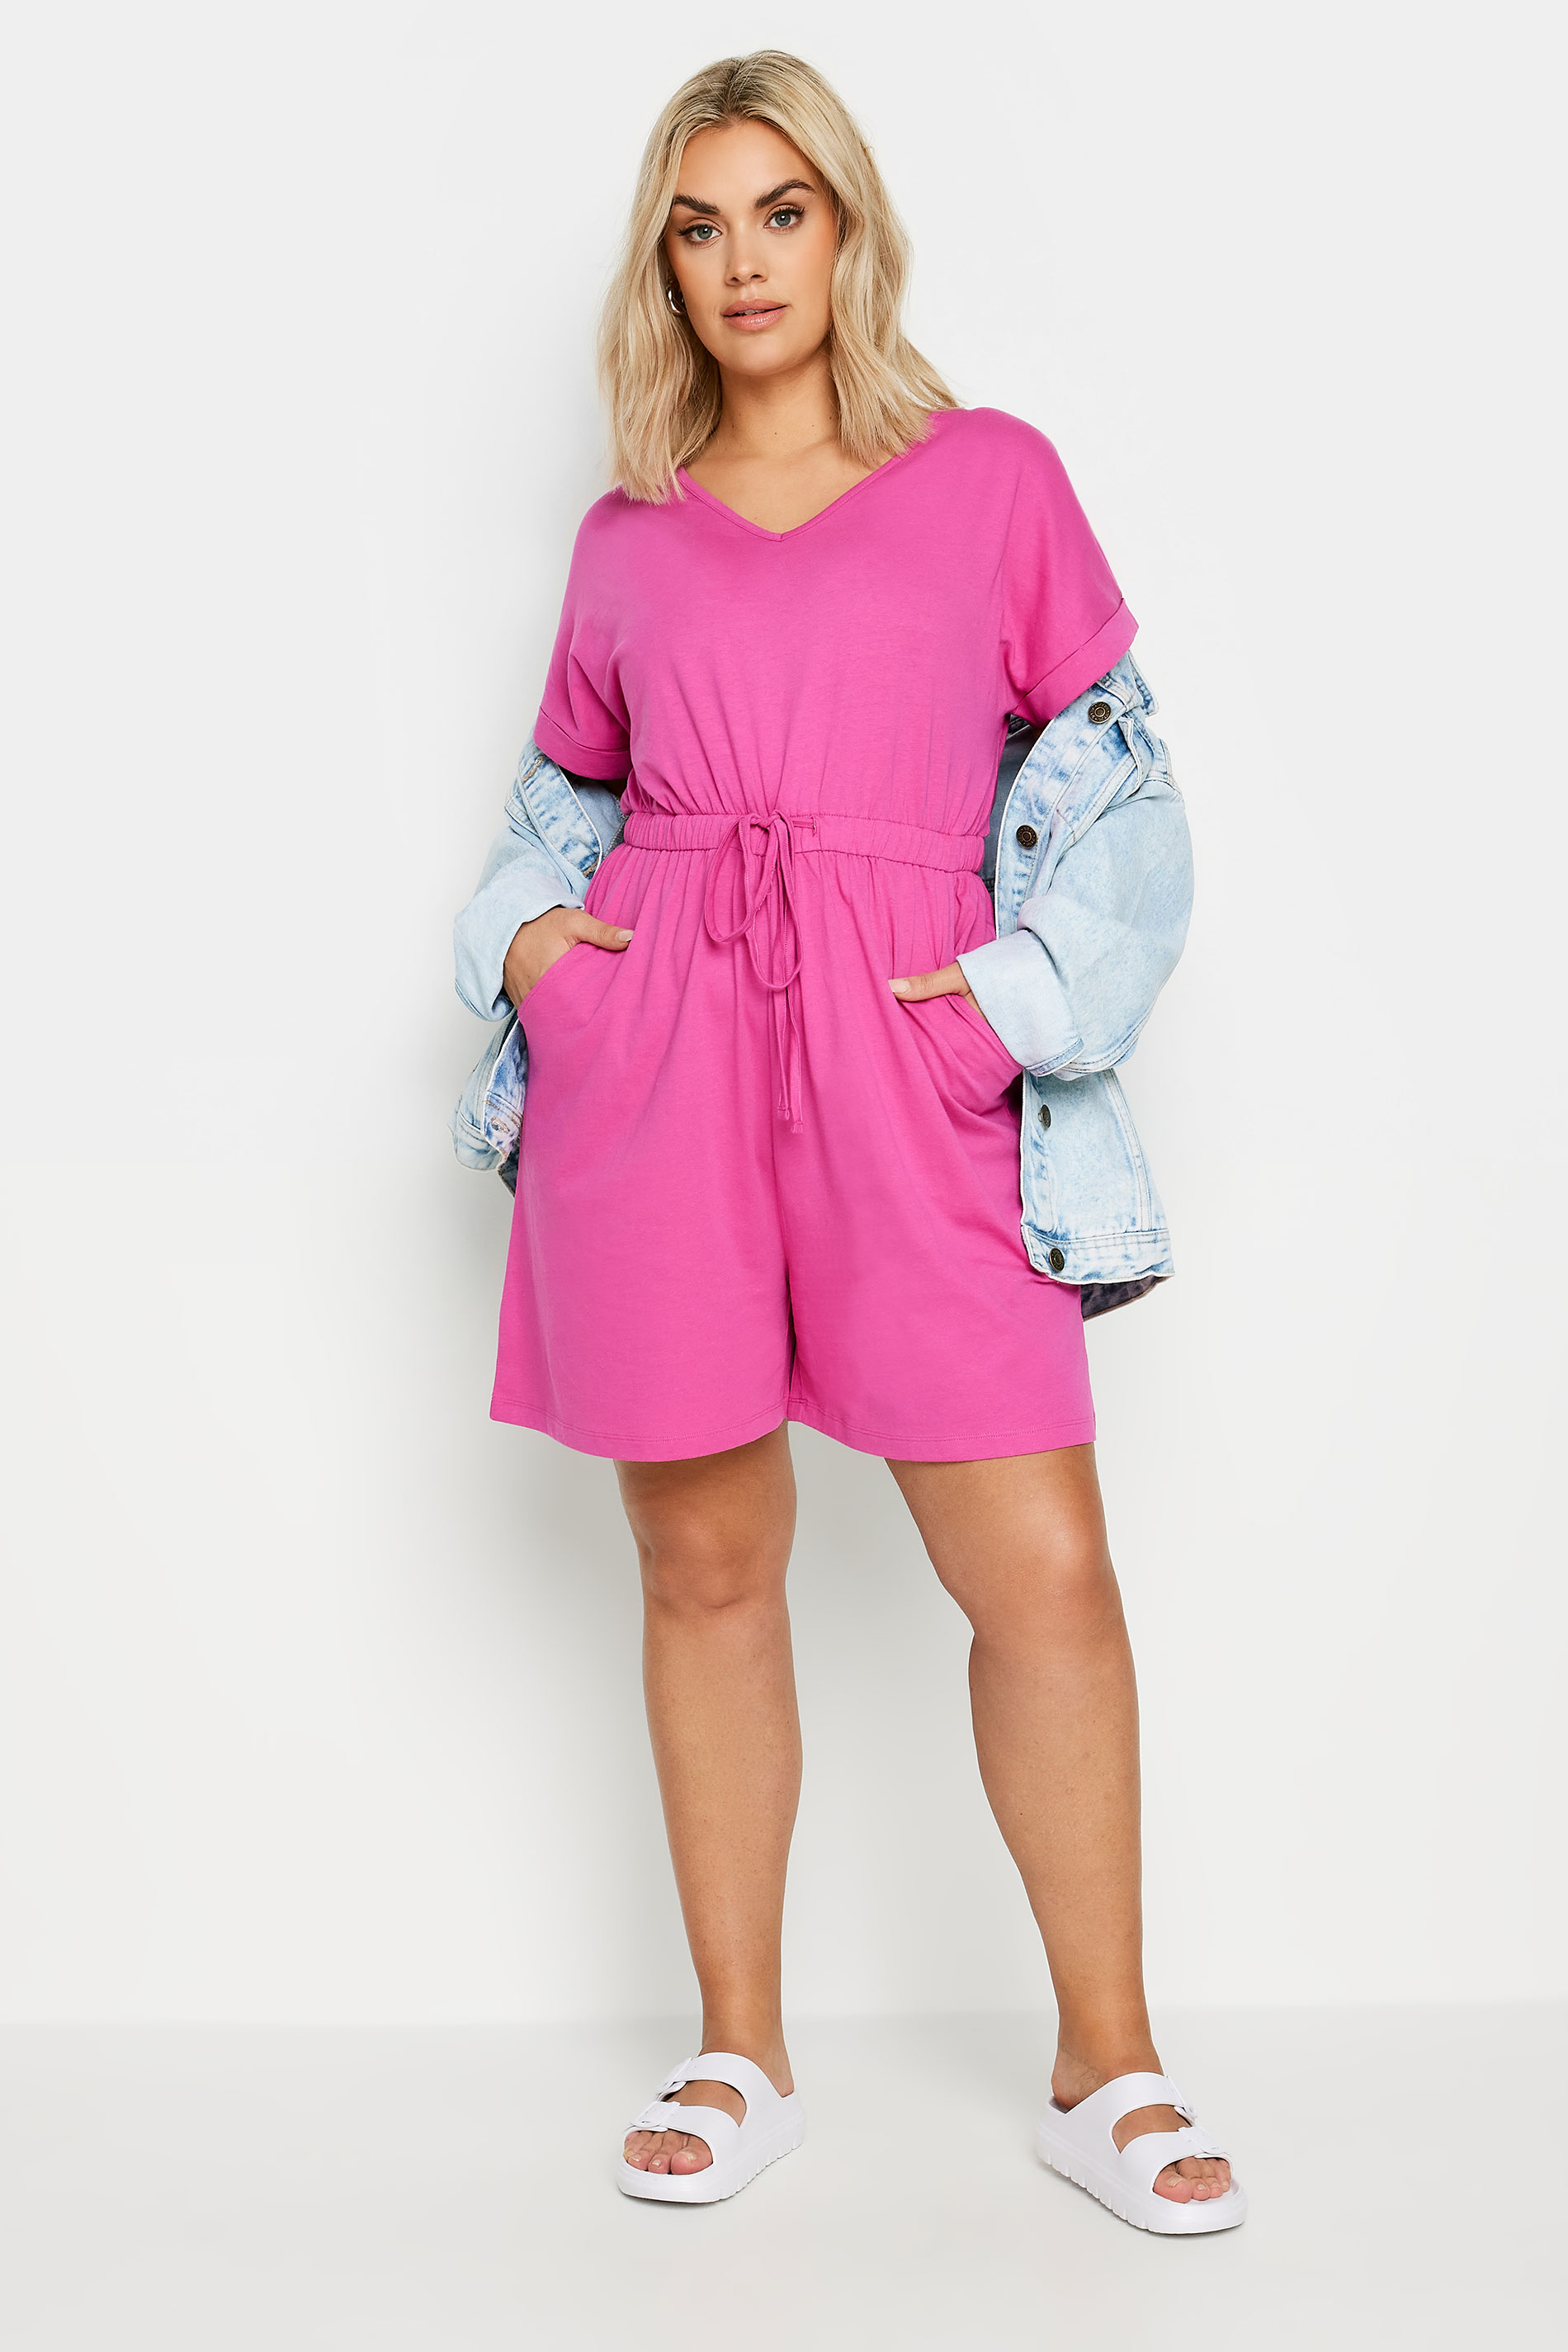 LIMITED COLLECTION Plus Size Hot Pink Drawstring Playsuit | Yours Clothing 2